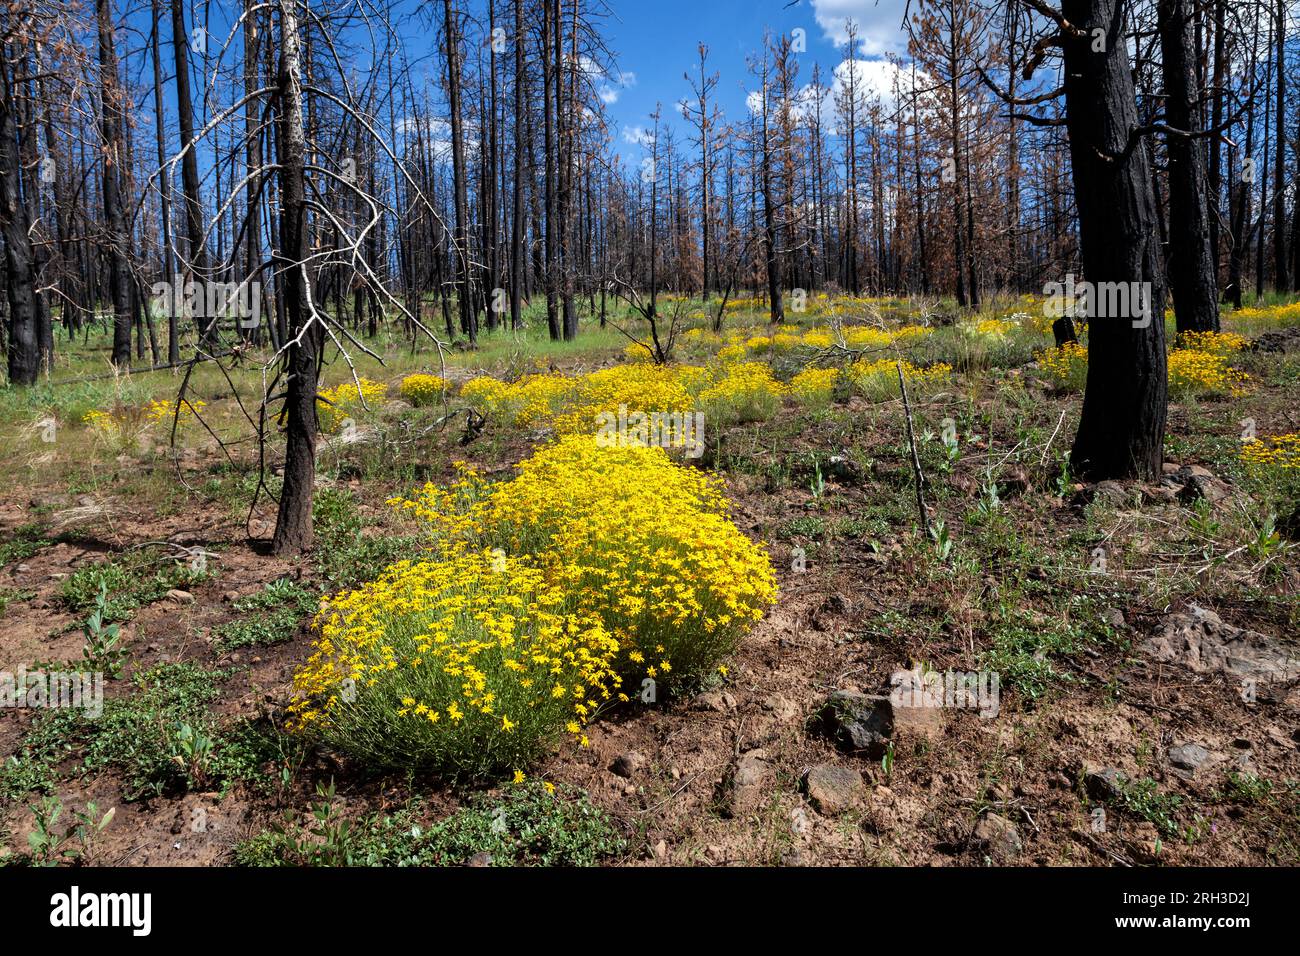 California goldfields bloom among trees burnt by the 2021 Tenant Fire in Northern California's Shasta Trinity National Forest Stock Photo